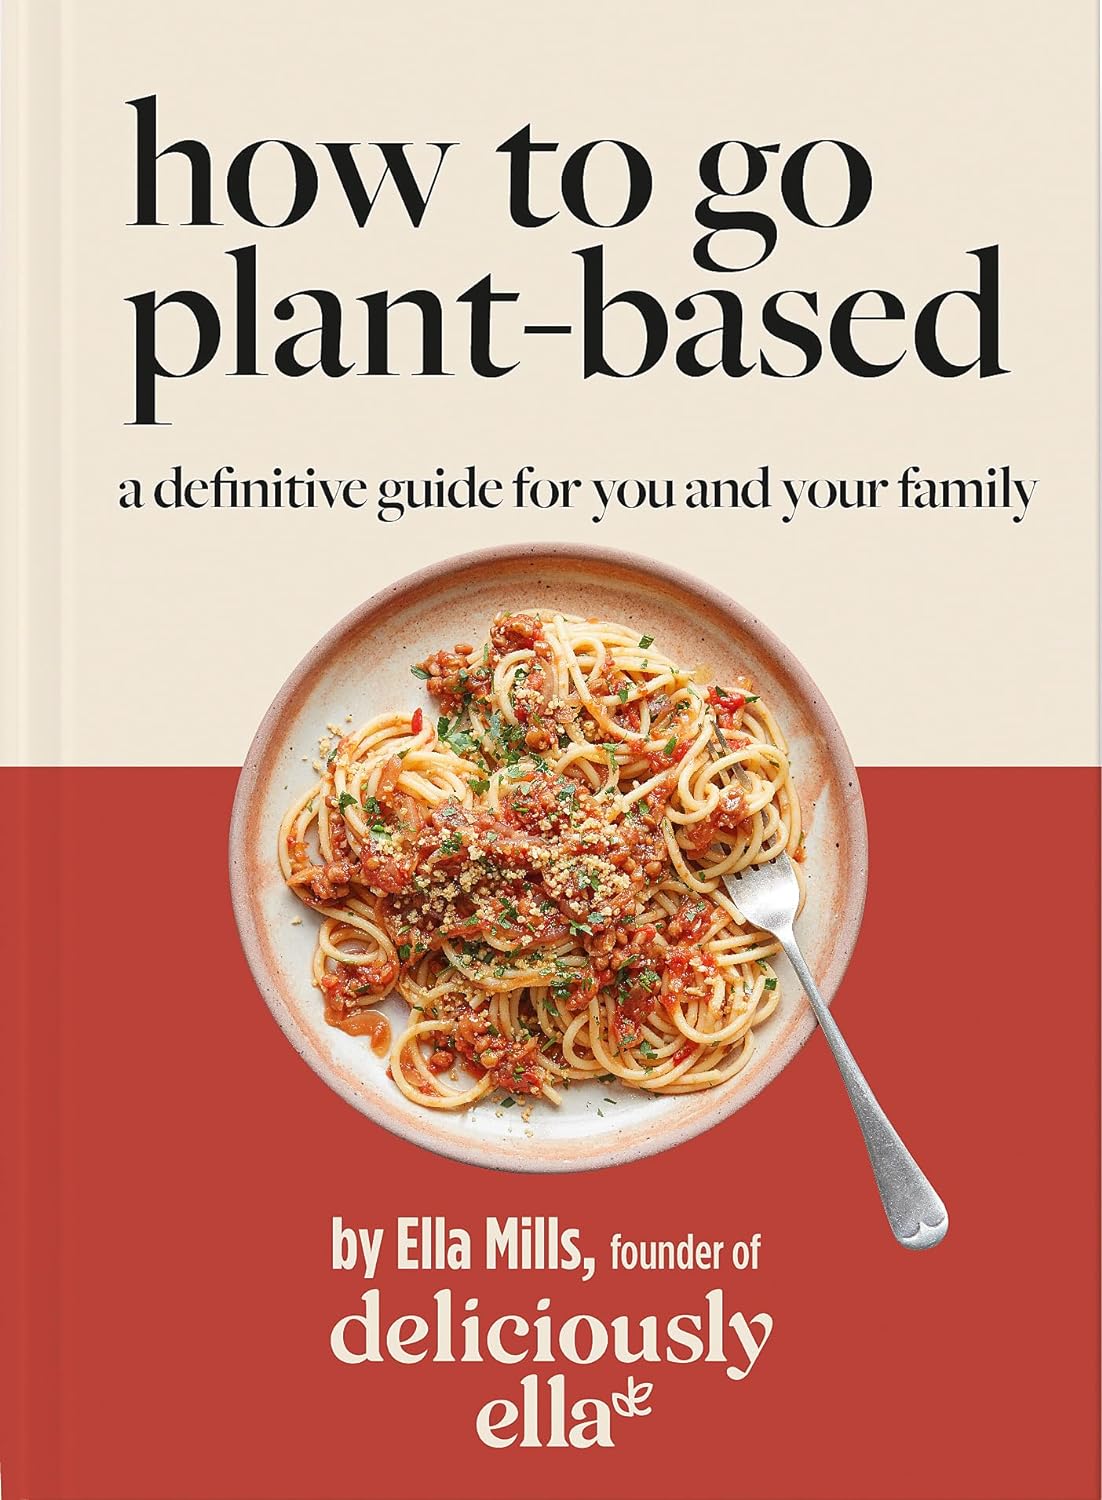 How to Go Plant-Based by Ella Mills